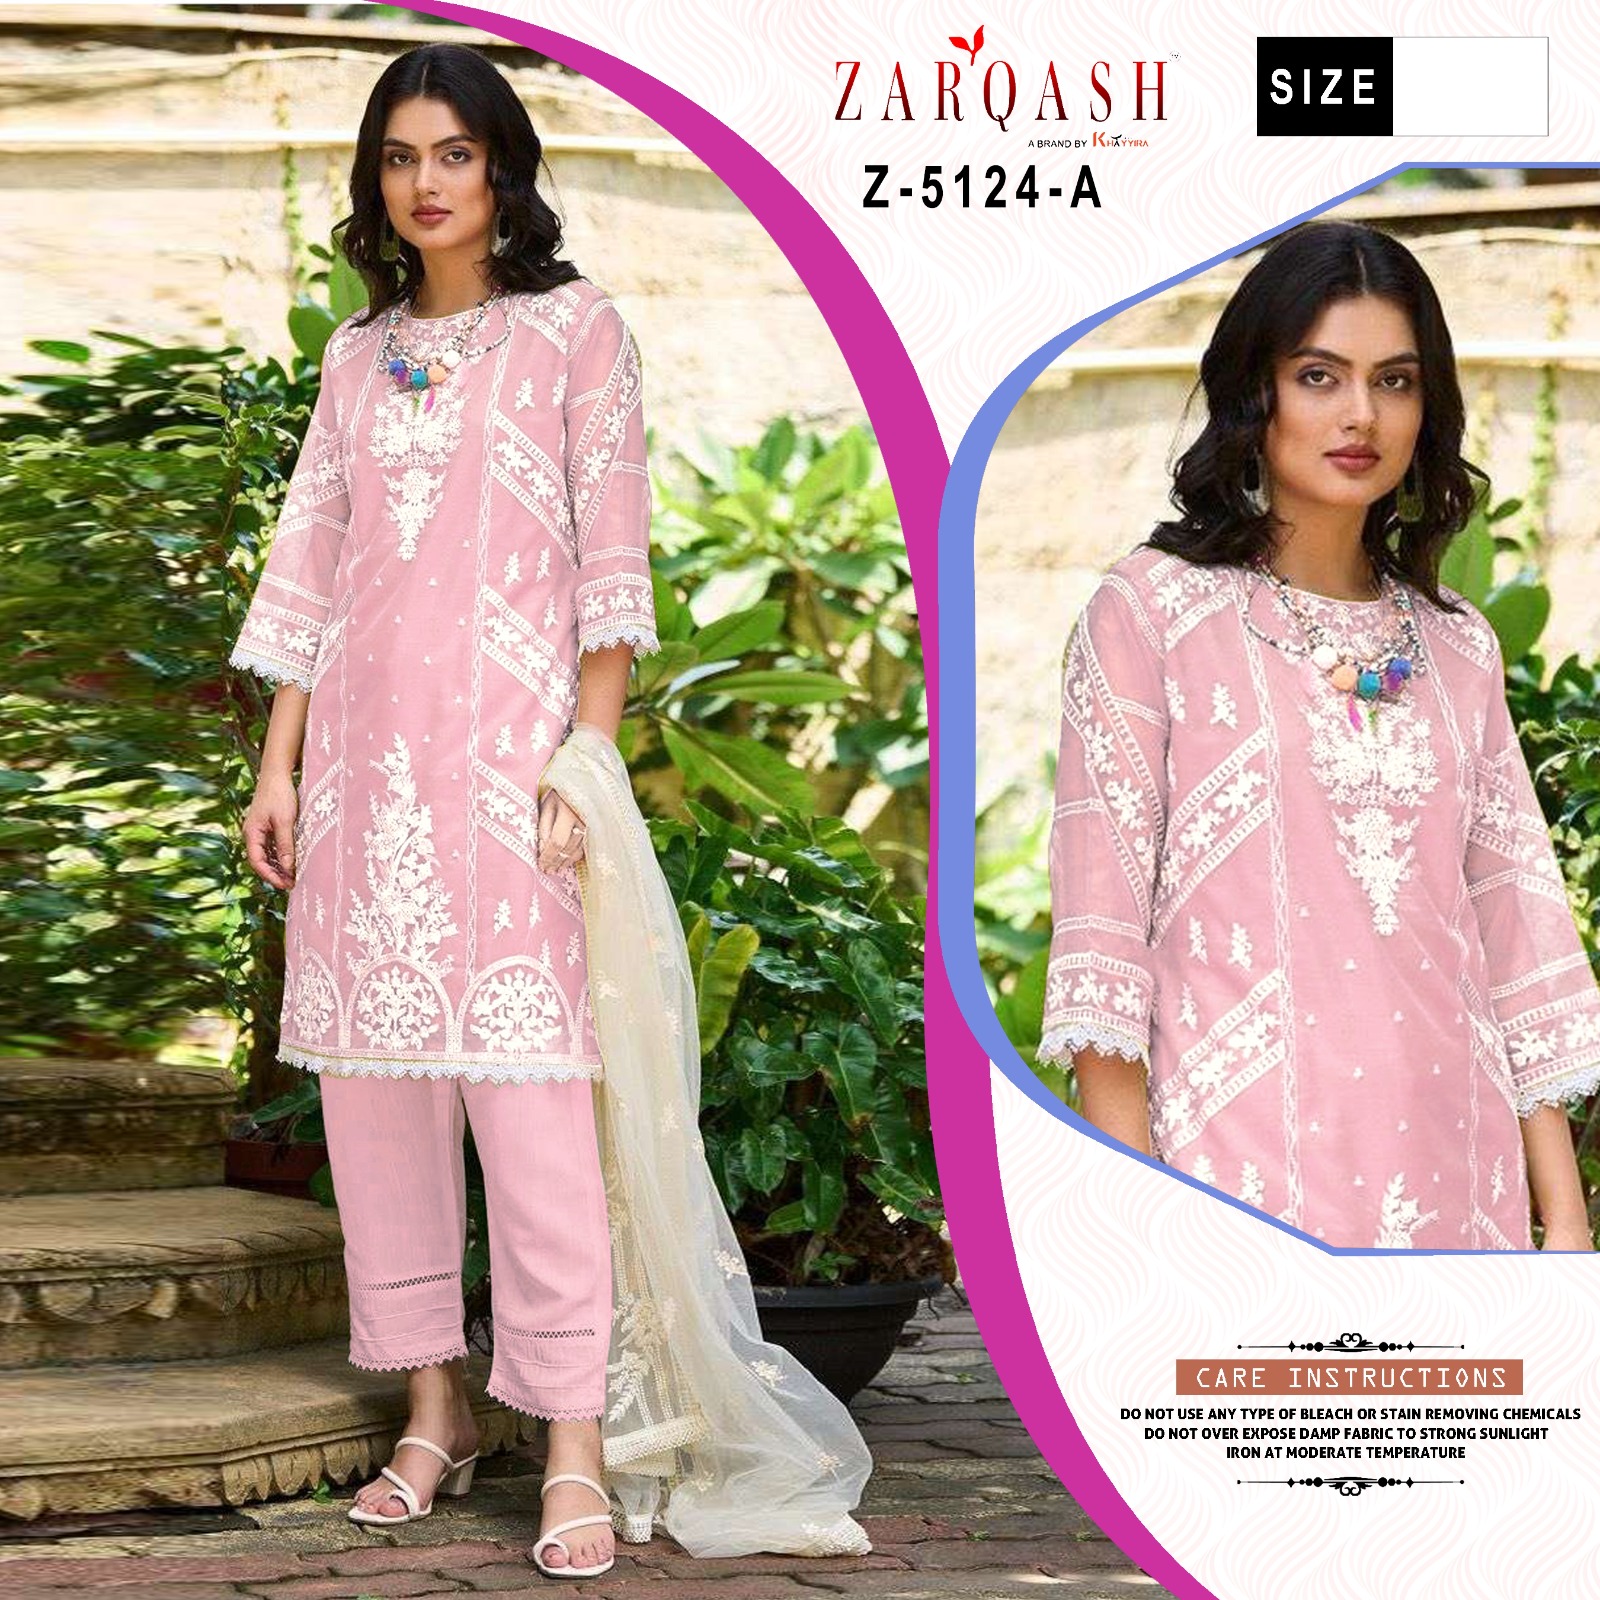 ZARQASH Z 5124 READYMADE SUITS IN COLOURS